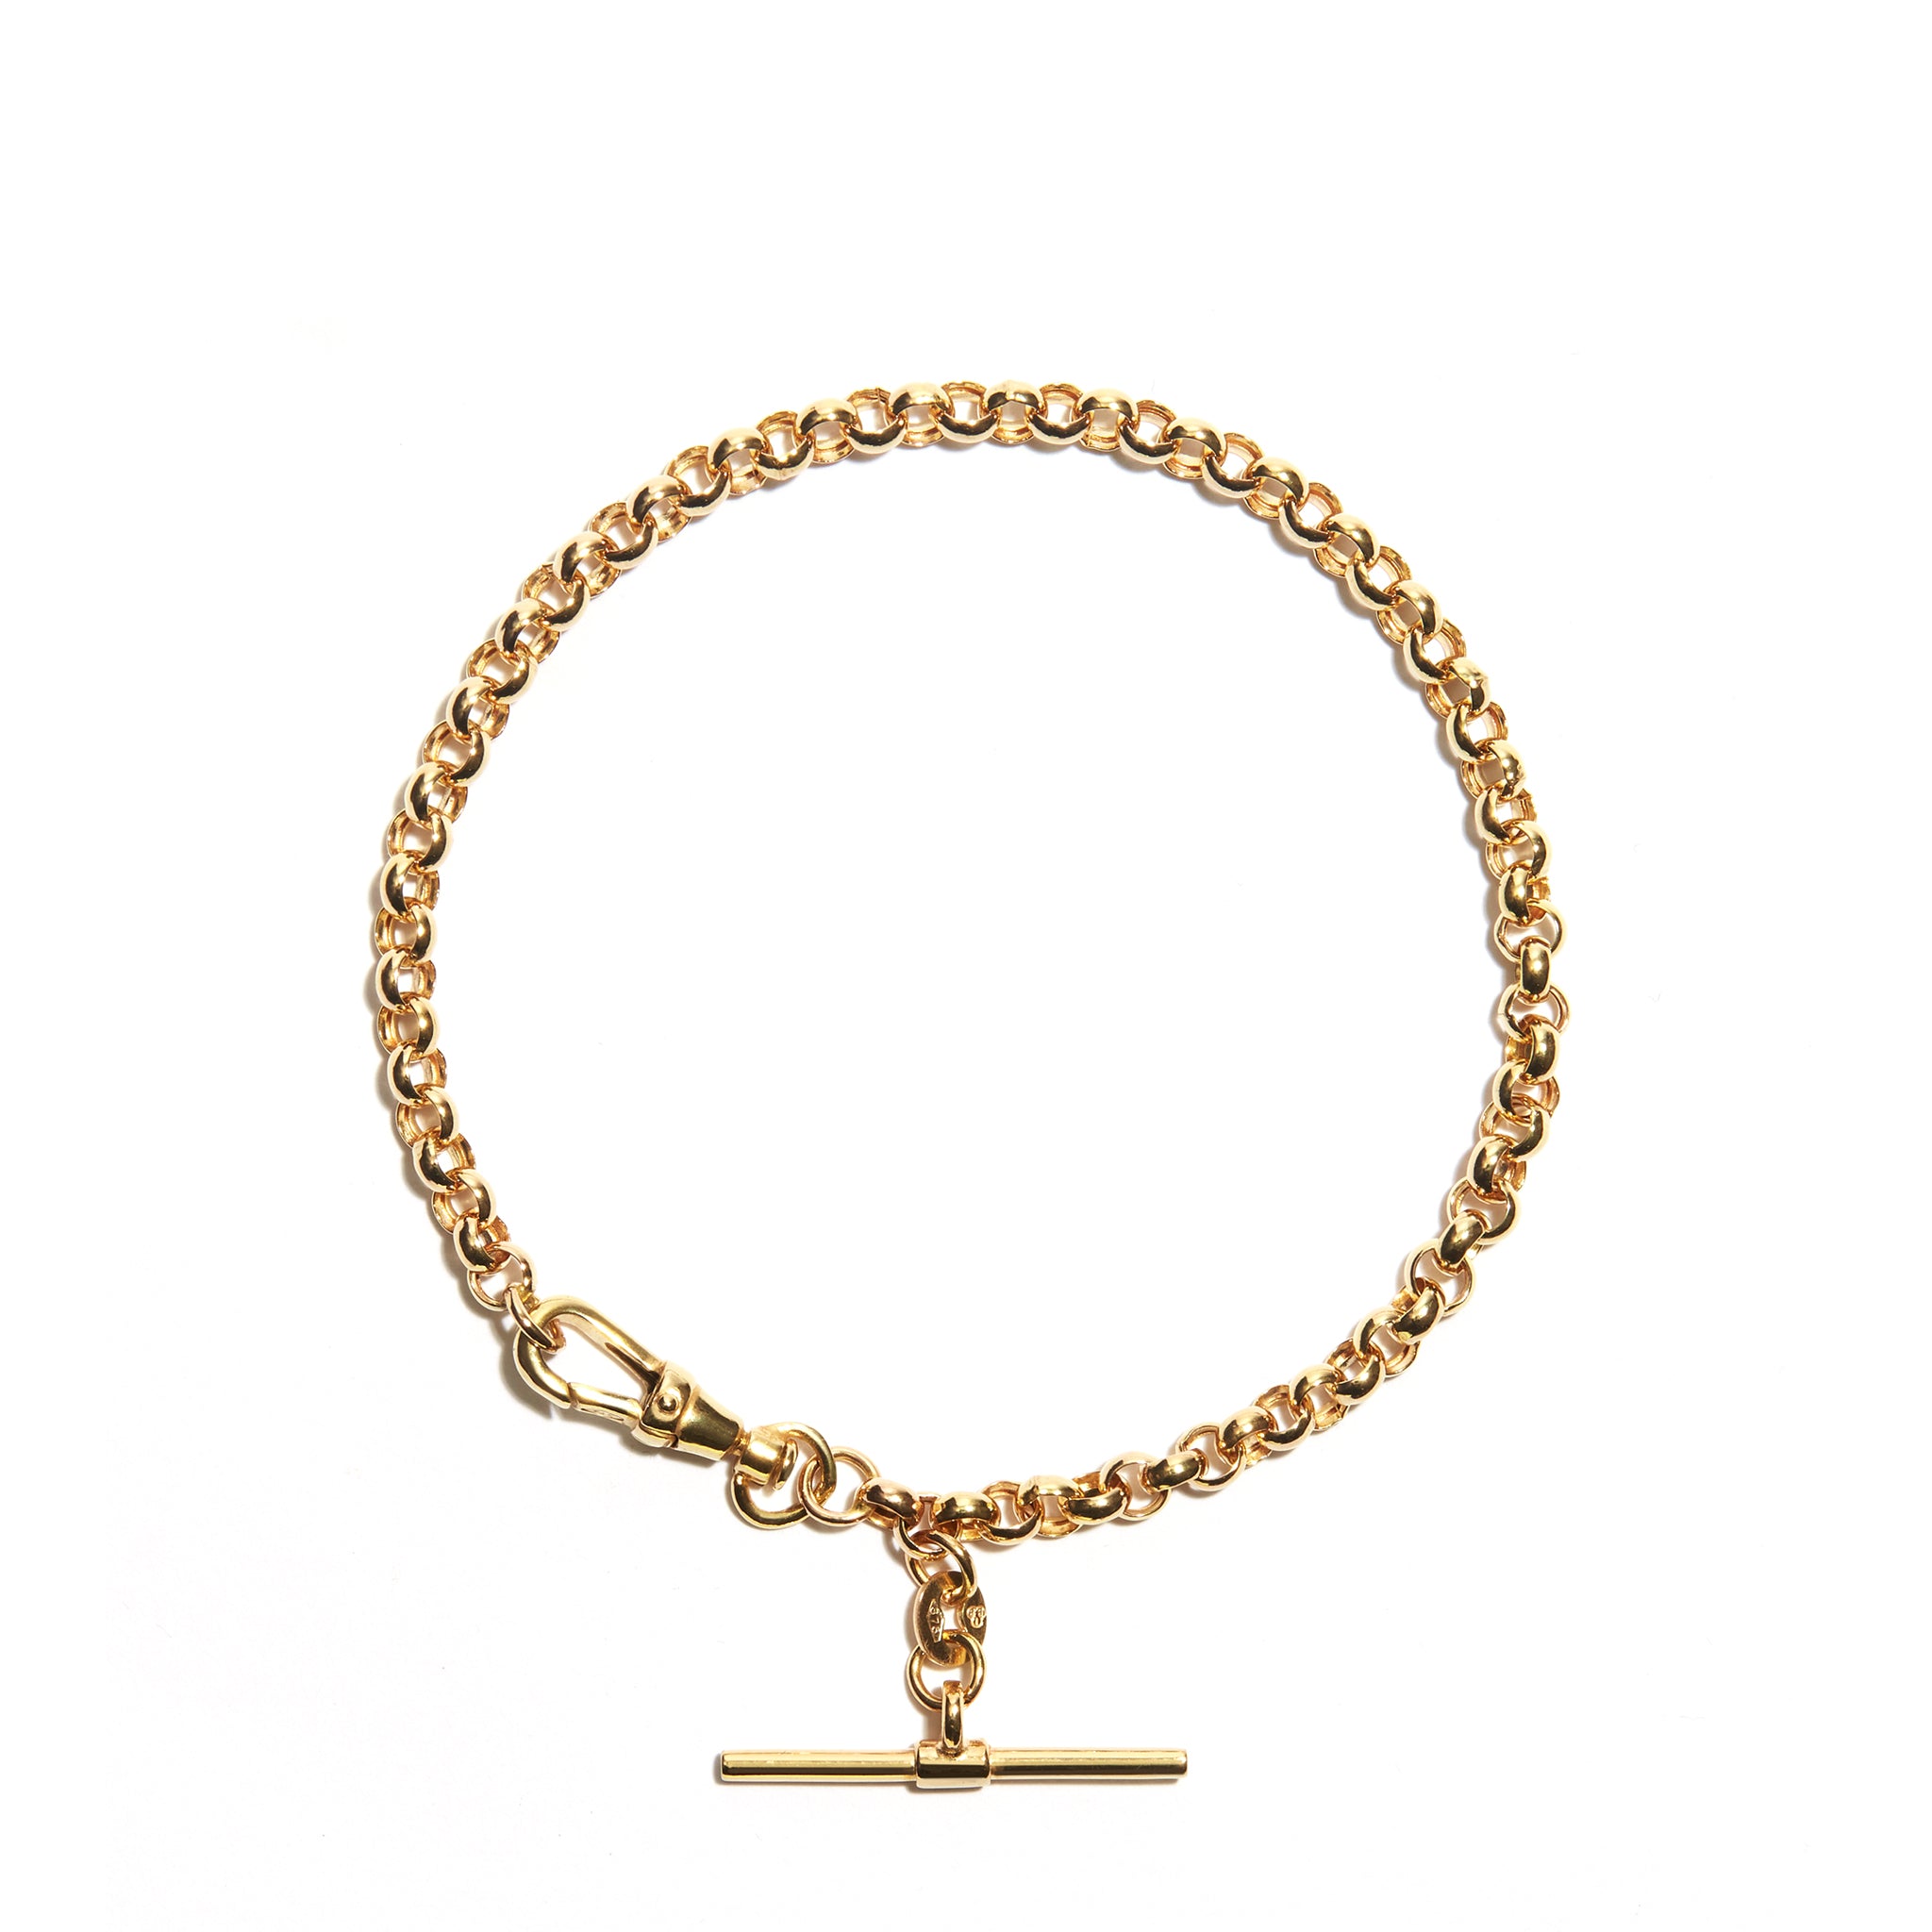 A stylish T-Bar belcher bracelet crafted from 9 Carat Gold, featuring circular delicate links for an elegant touch.